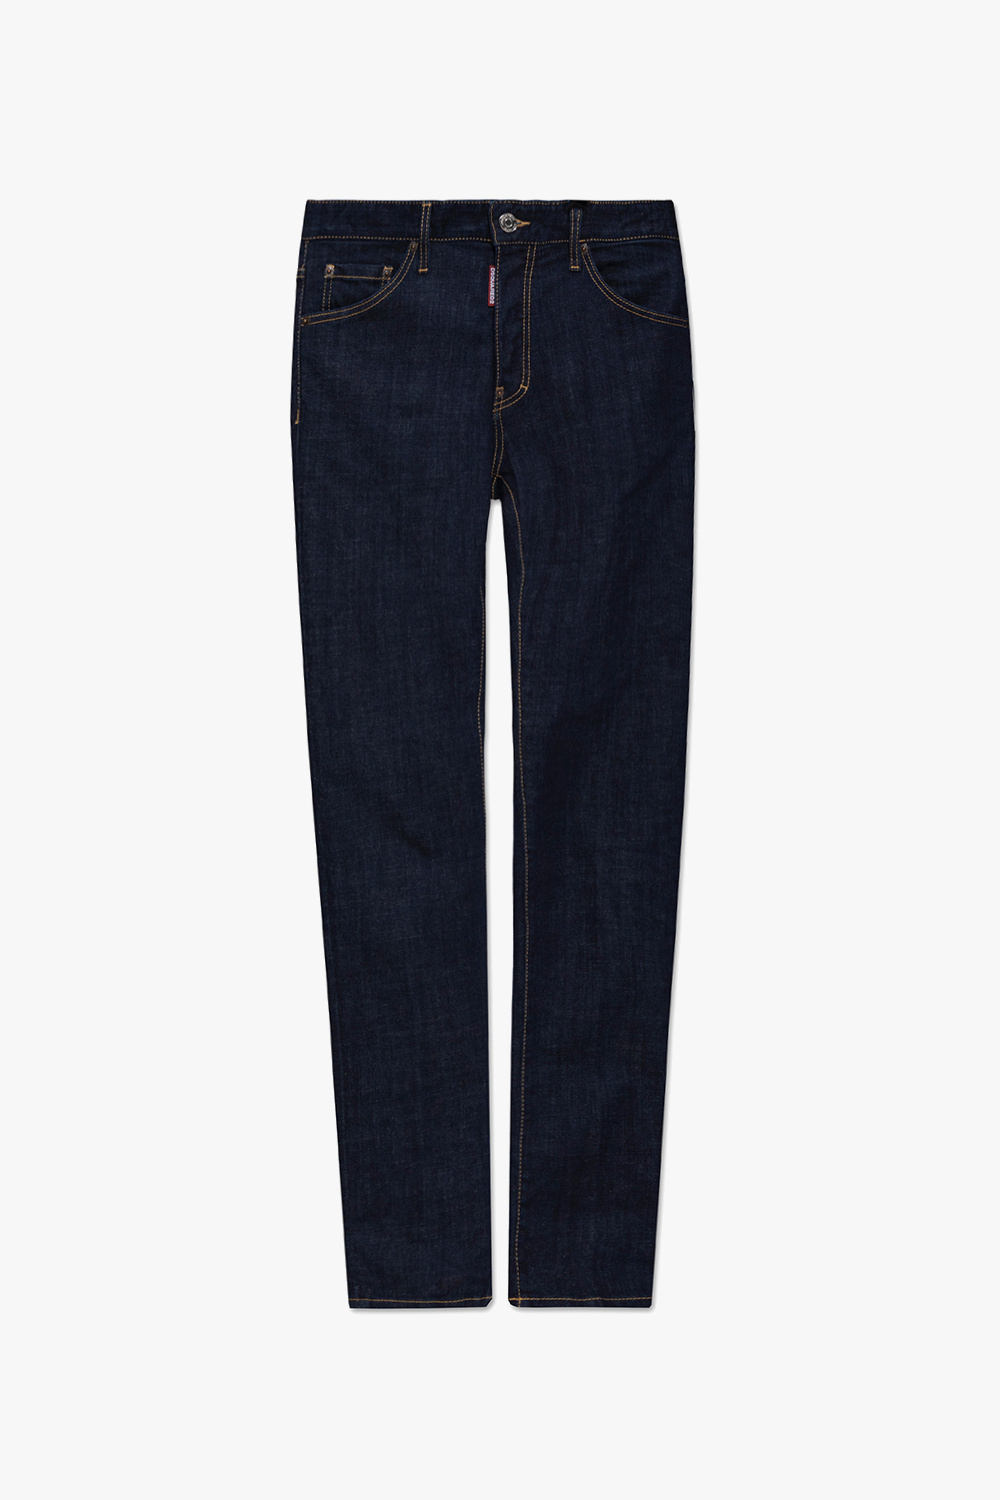 Navy blue ‘Cool Guy’ jeans Dsquared2 - Vitkac GB